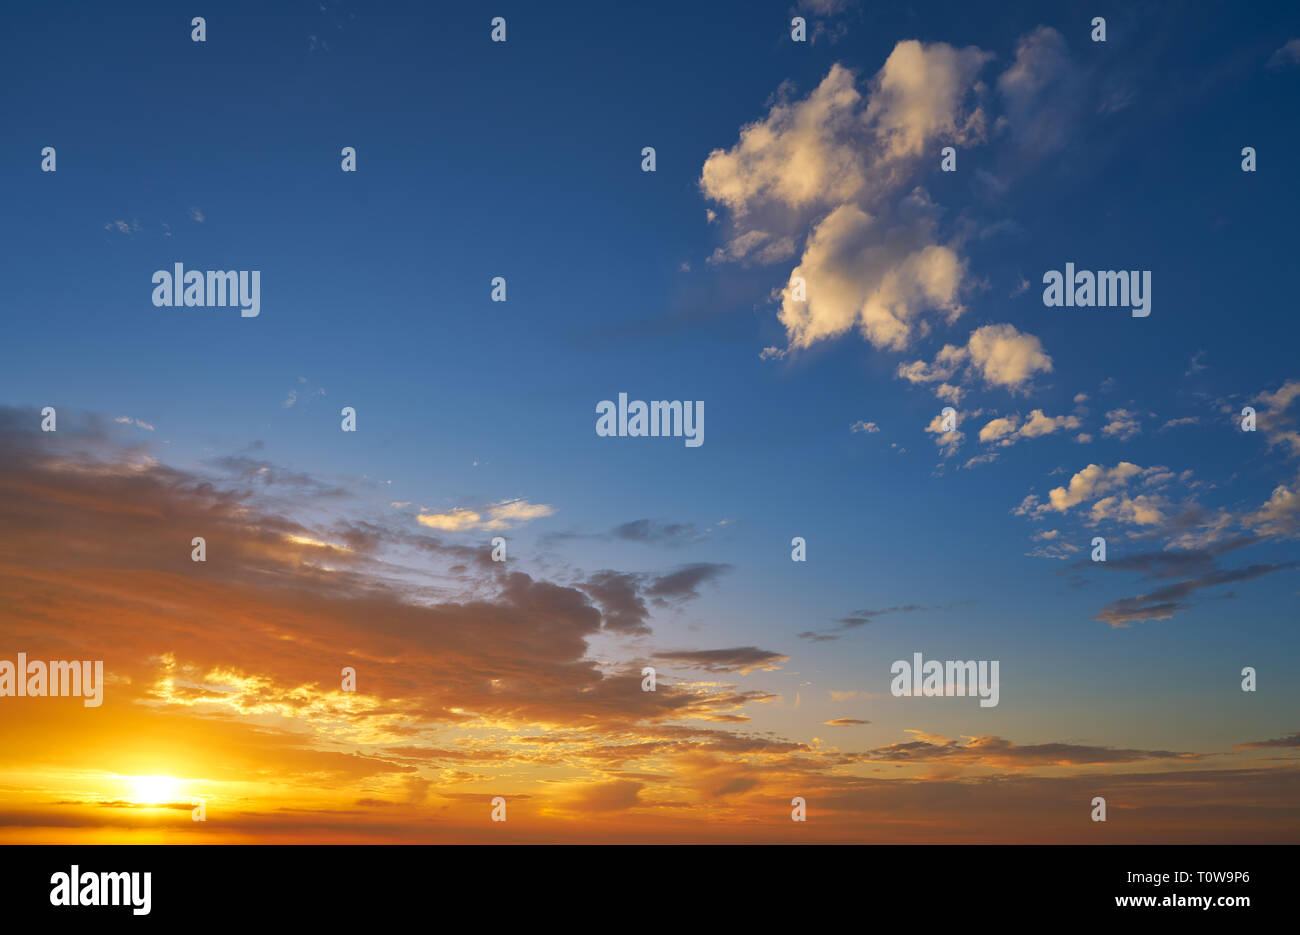 Sunrise or sunset sky with clouds in blue and orange Stock Photo